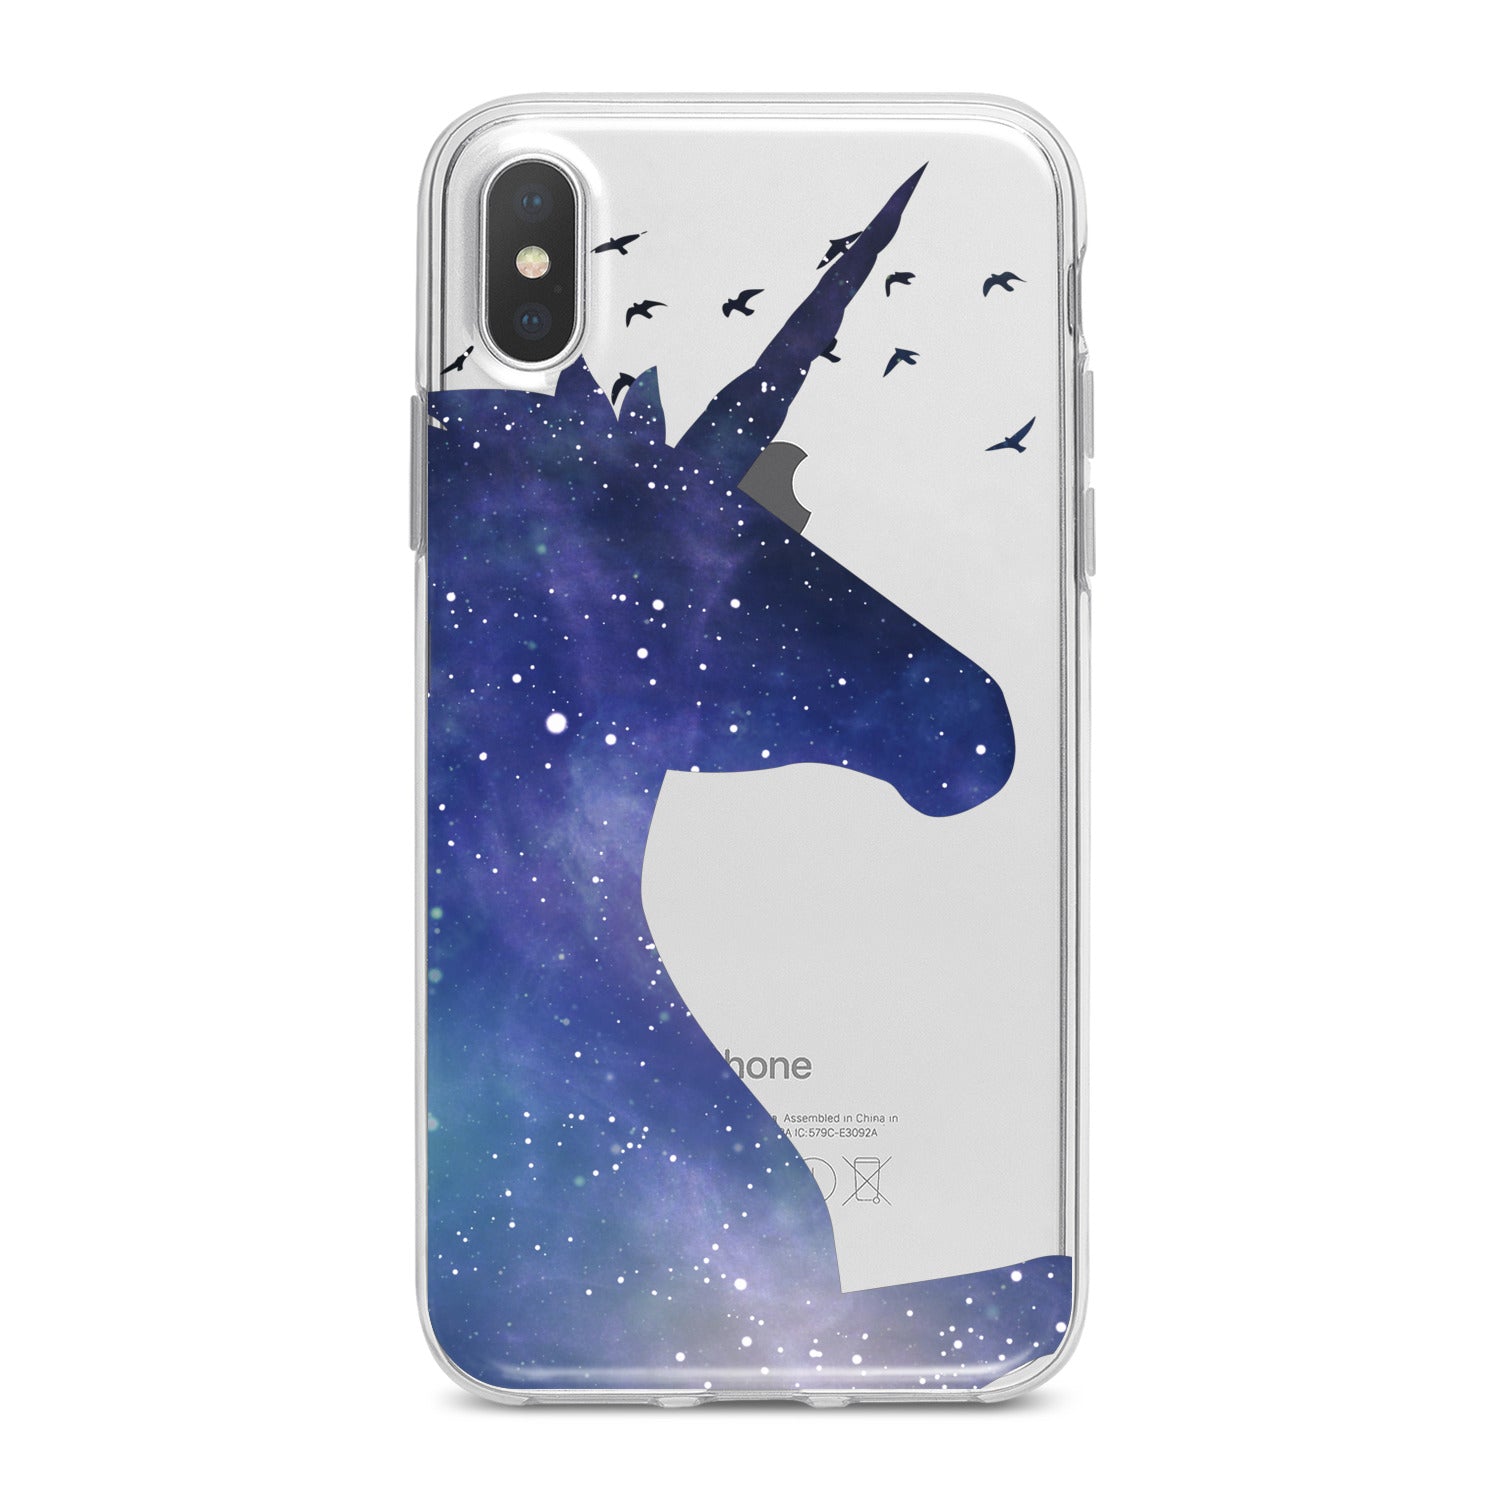 Lex Altern Watercolor Unicorn Phone Case for your iPhone & Android phone.